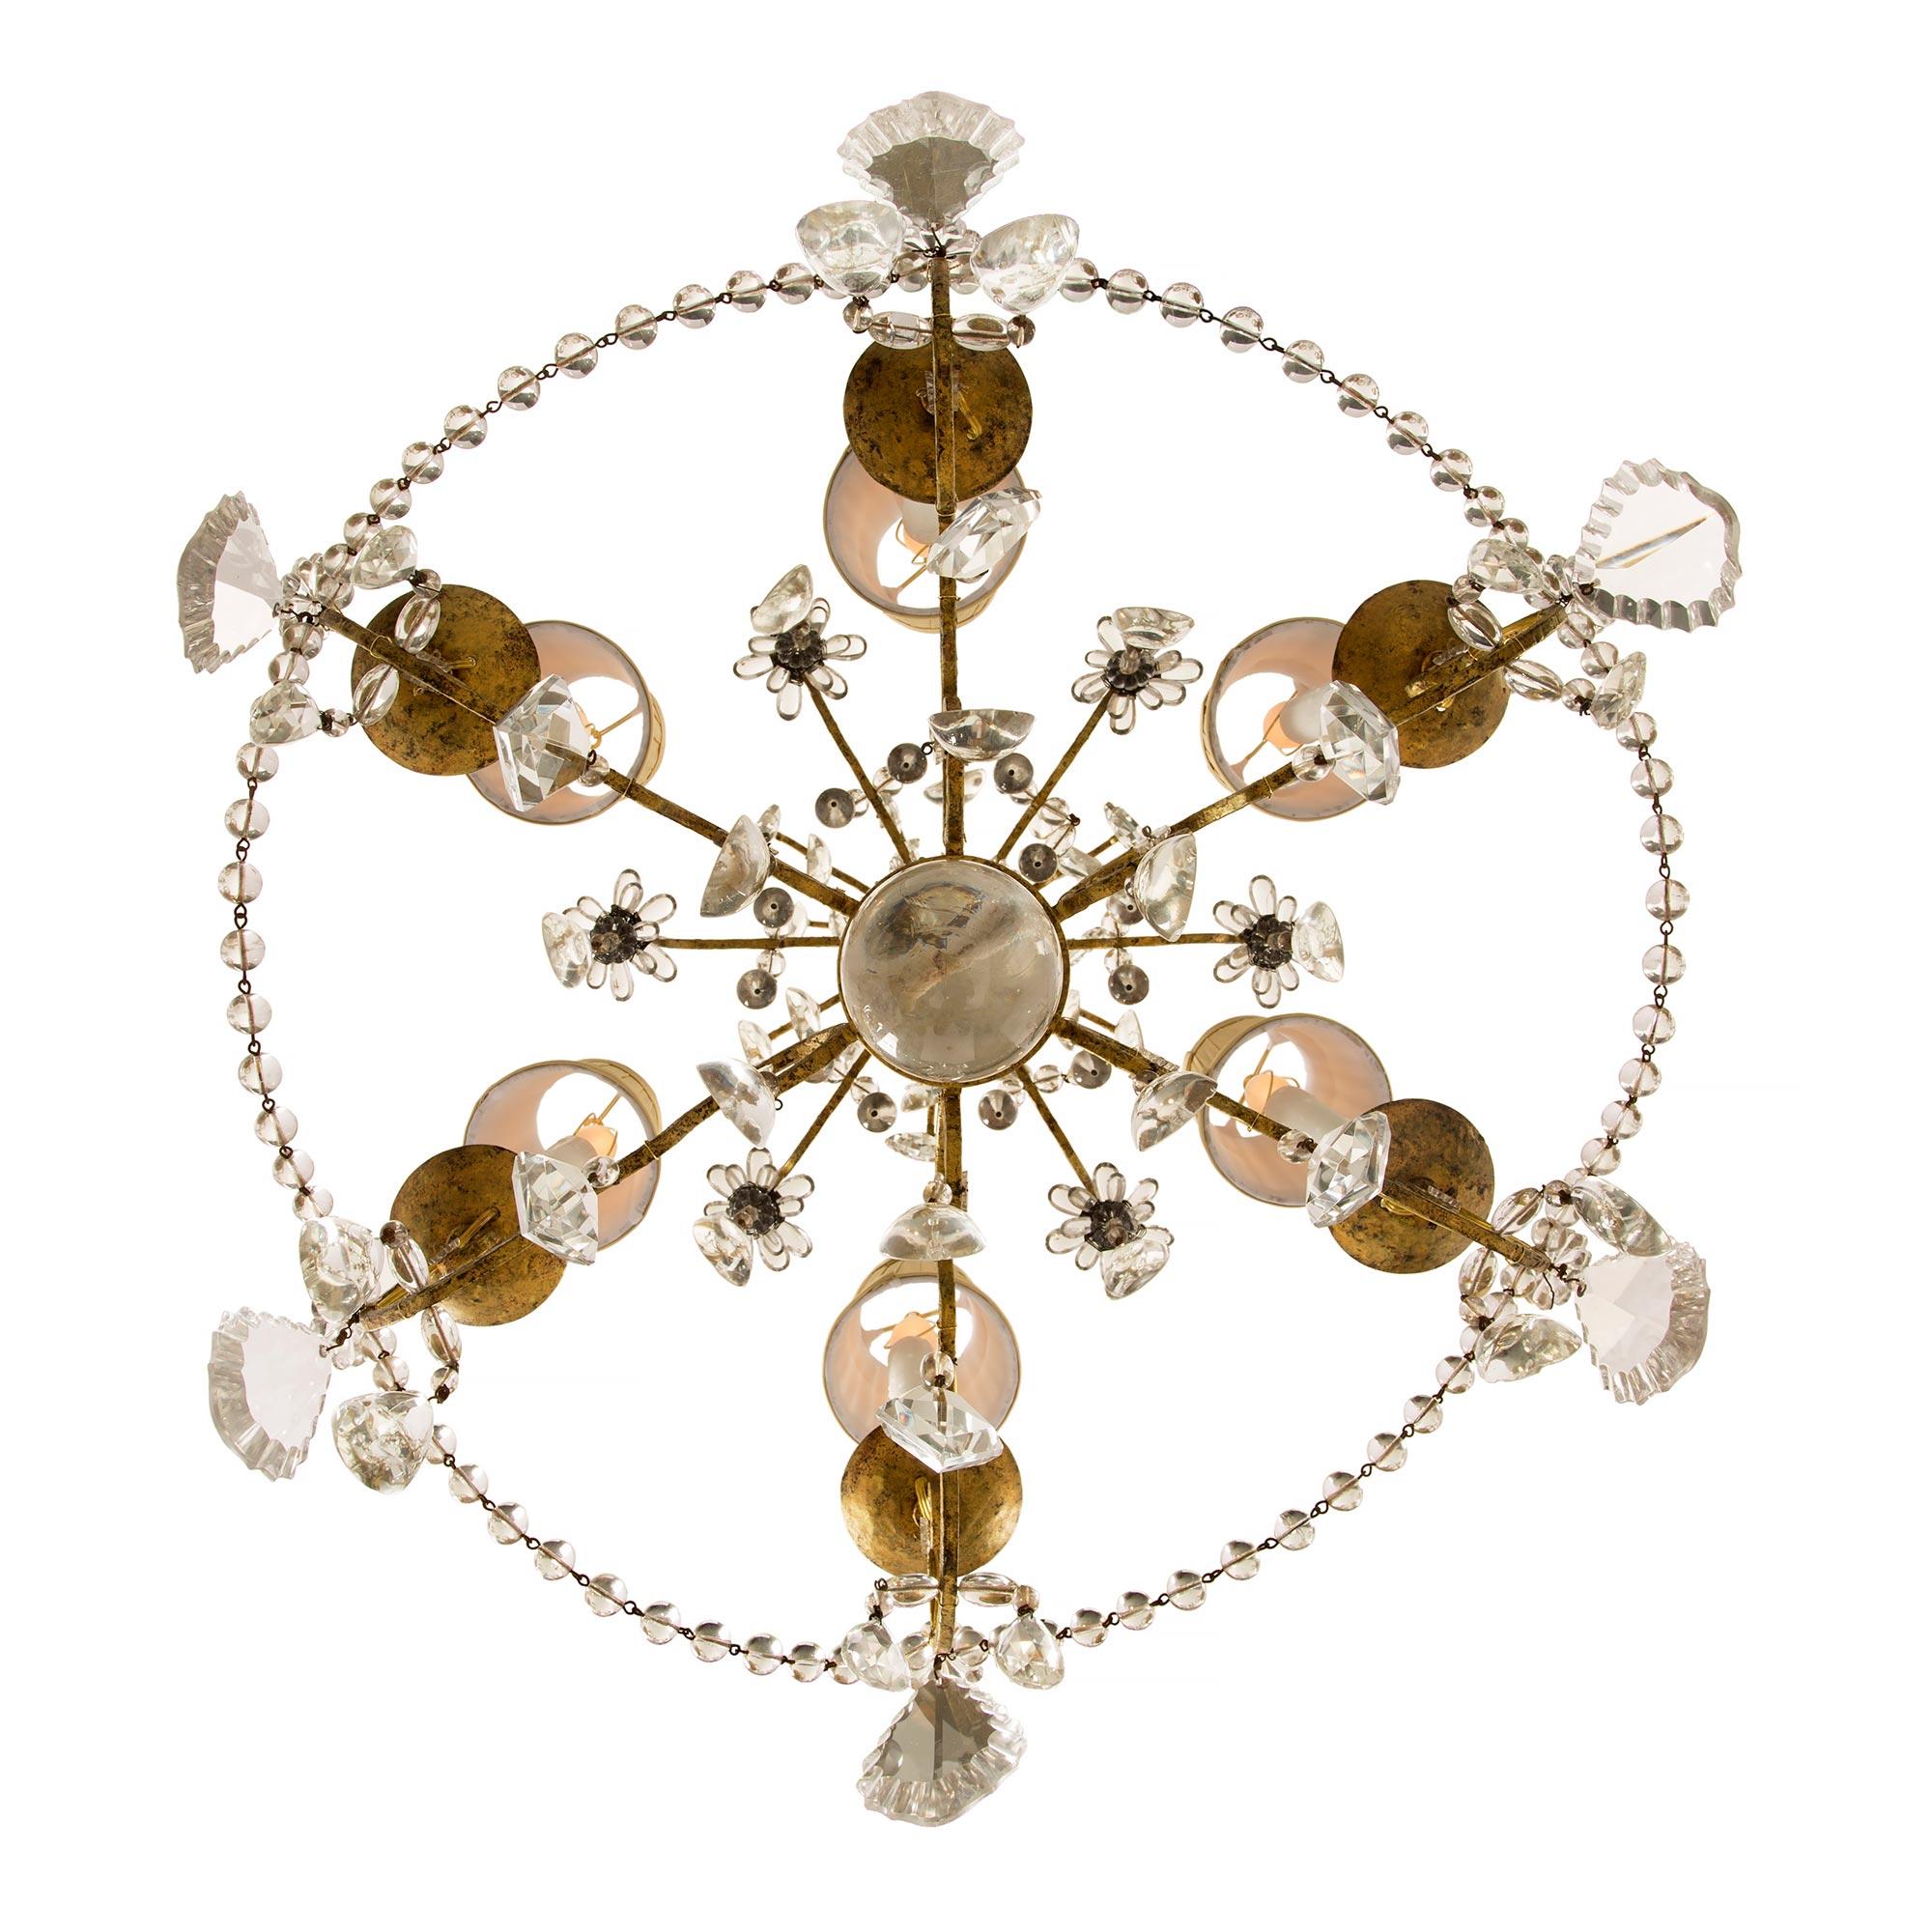 A lovely Italian 19th century Louis XV style gilt iron crystal and glass six arm chandelier. The chandelier is centered by a Fine solid bottom crystal ball amidst lovely cut crystal pendants. Each elegantly scrolled arm is decorated with large